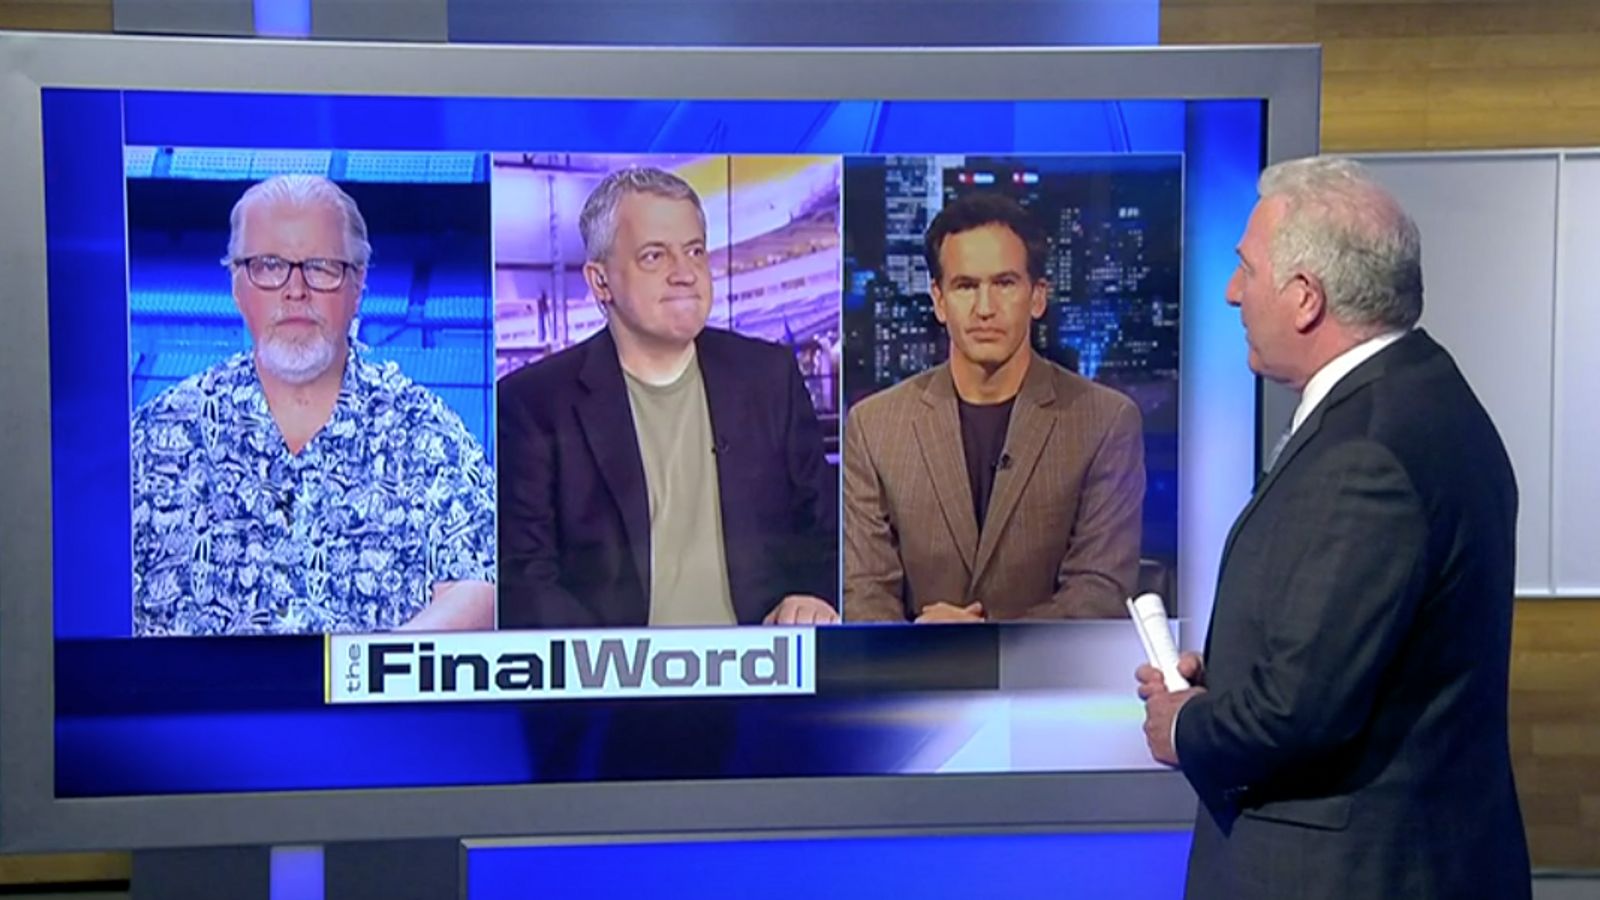 DK on WPXI's 'Final Word' with Alby Oxenreiter, Mark Madden, Tim